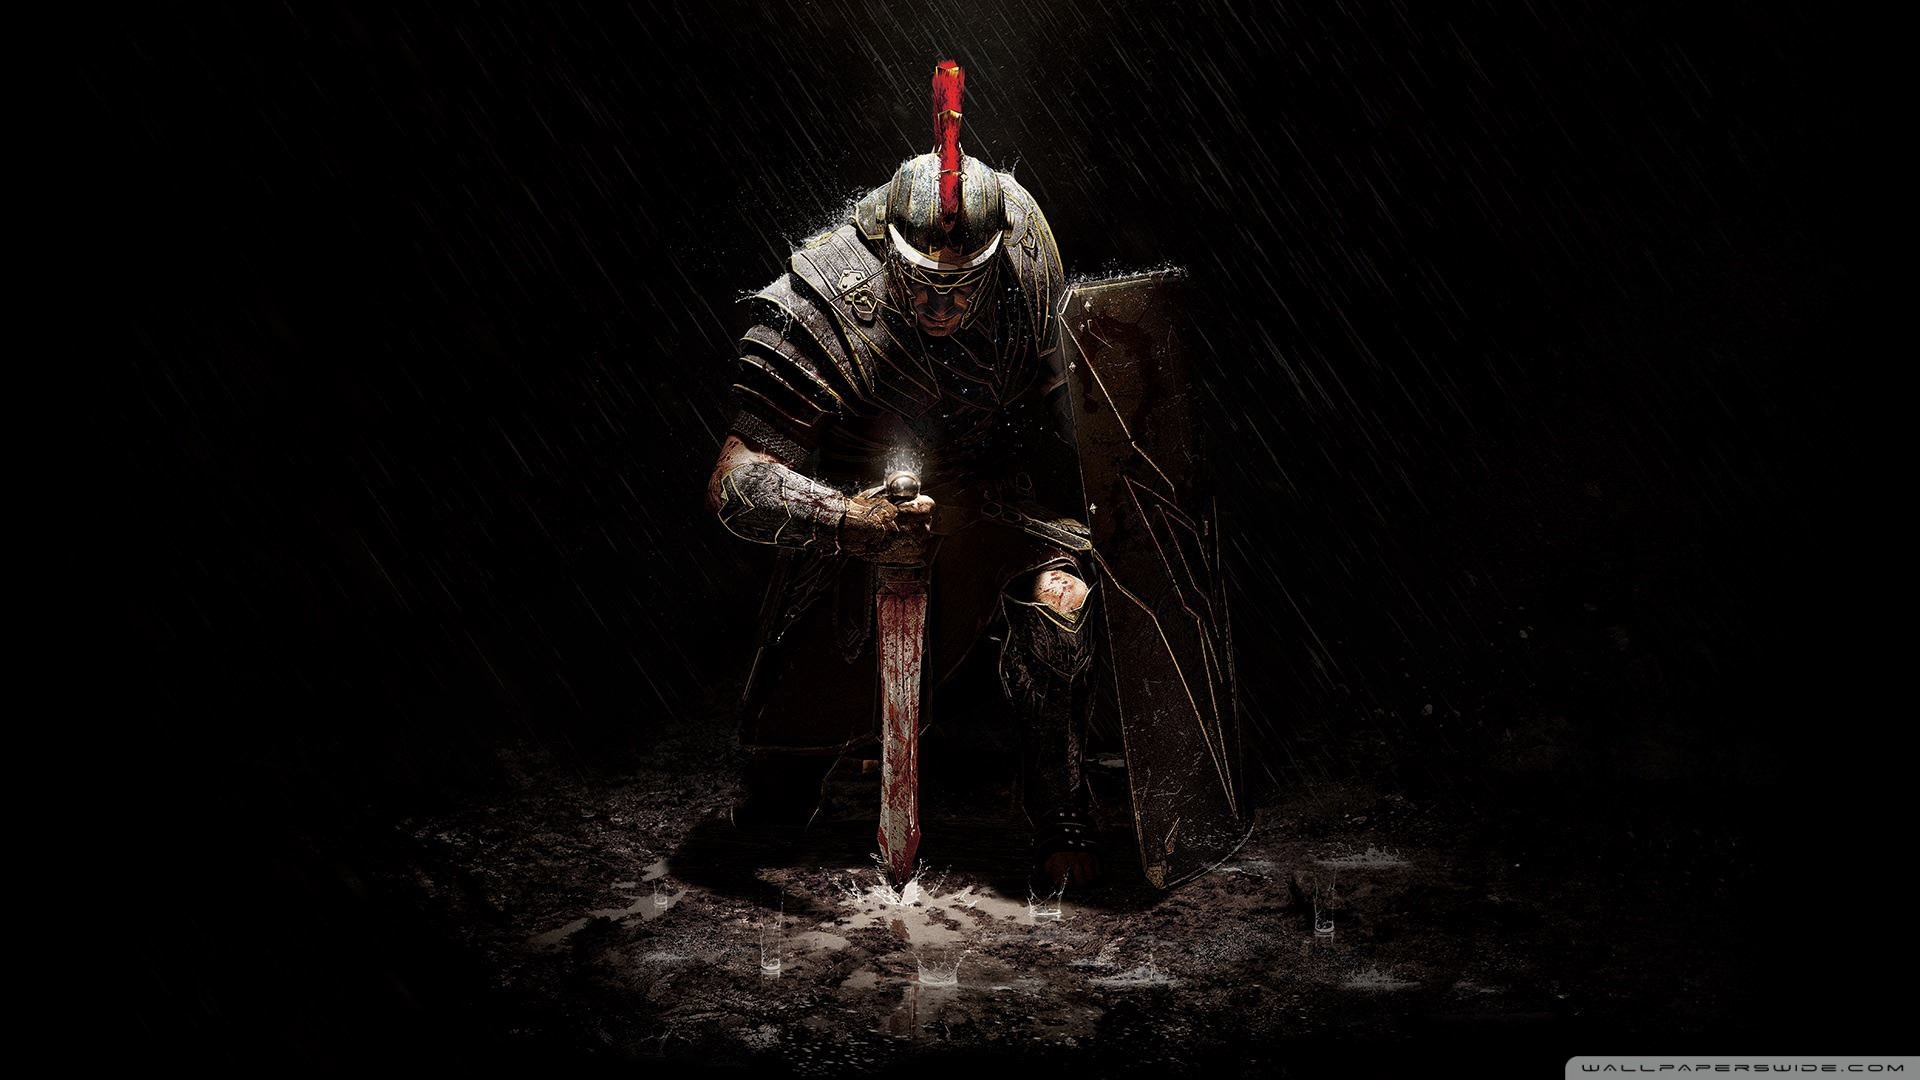 1920x1080 Search Results for “ryse son of rome iphone 5 wallpaper” – Adorable  Wallpapers